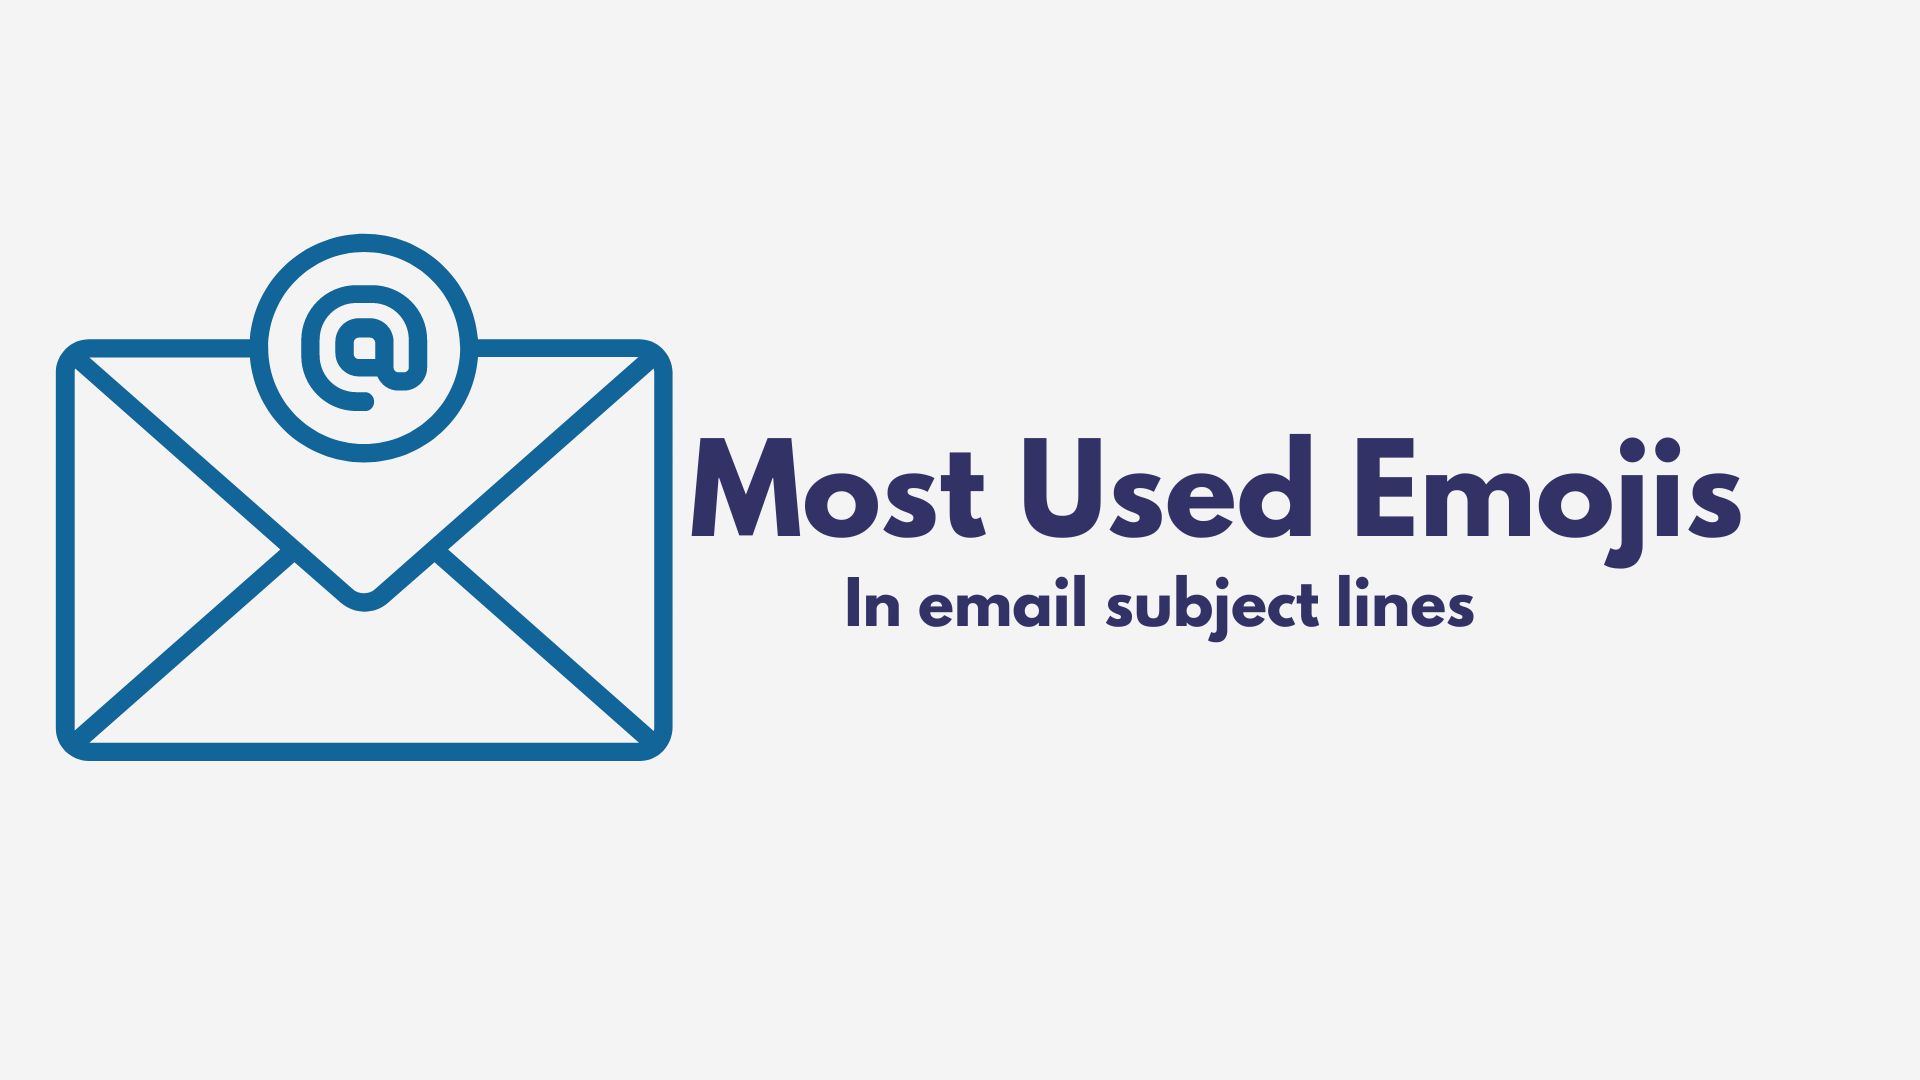 Most popular emojis in email newsletters subject lines